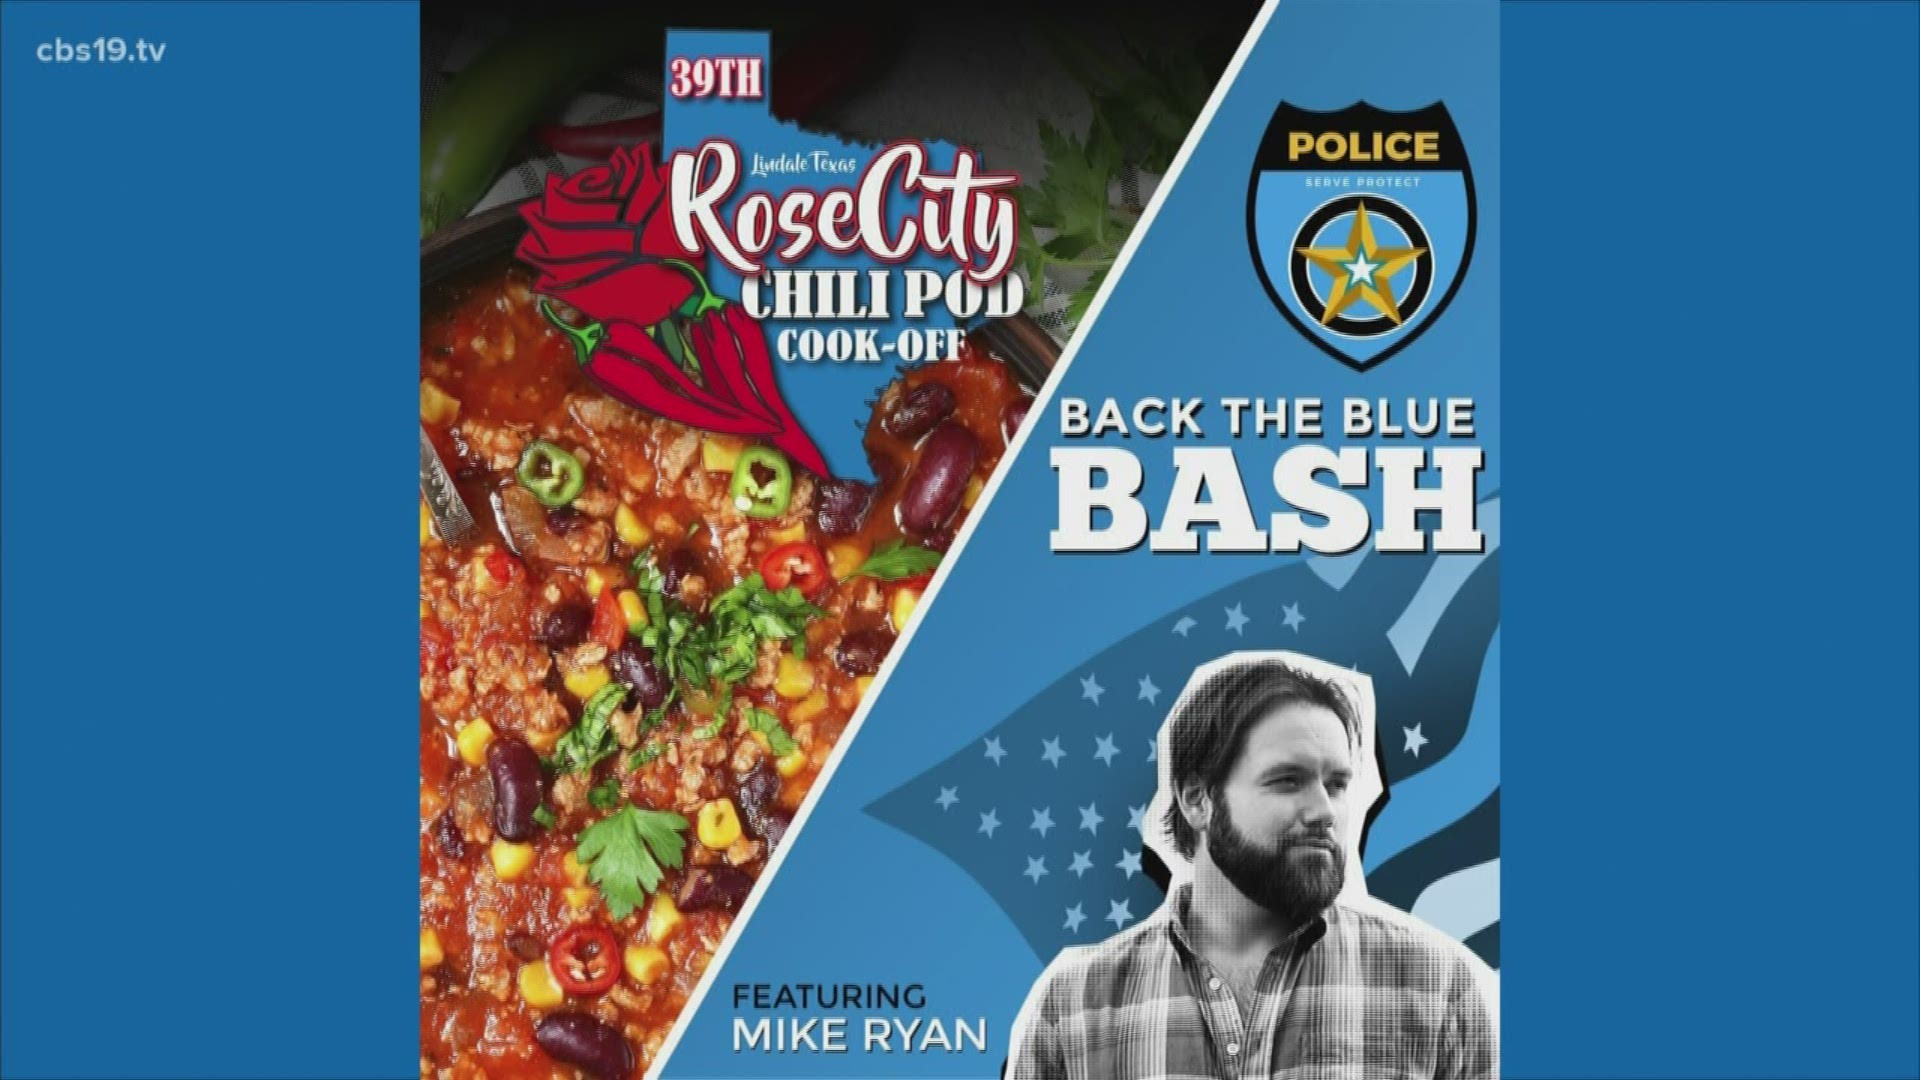 CBS19's Channing Curtis and Aaron Baker interviewed Monica Cassey, ahead of the Rose City Chili Pod Cook-Off.